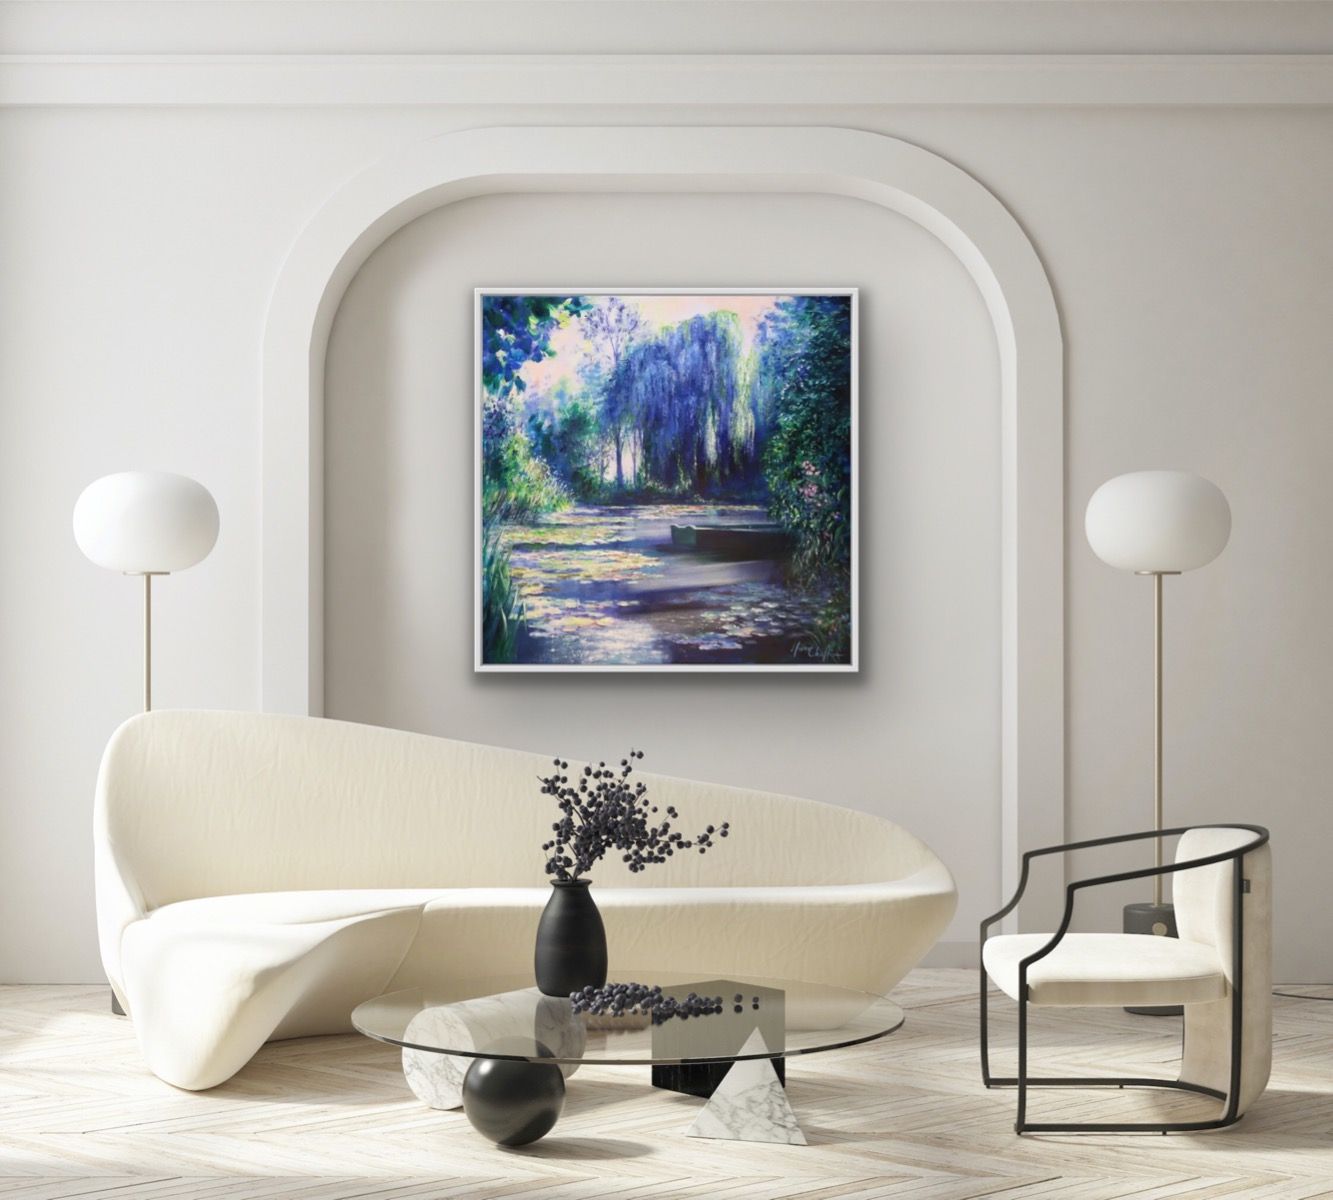 Harmony in blue at Giverny ( water gardens at Claude Monet’s house ) by Mary Chaplin - Secondary Image